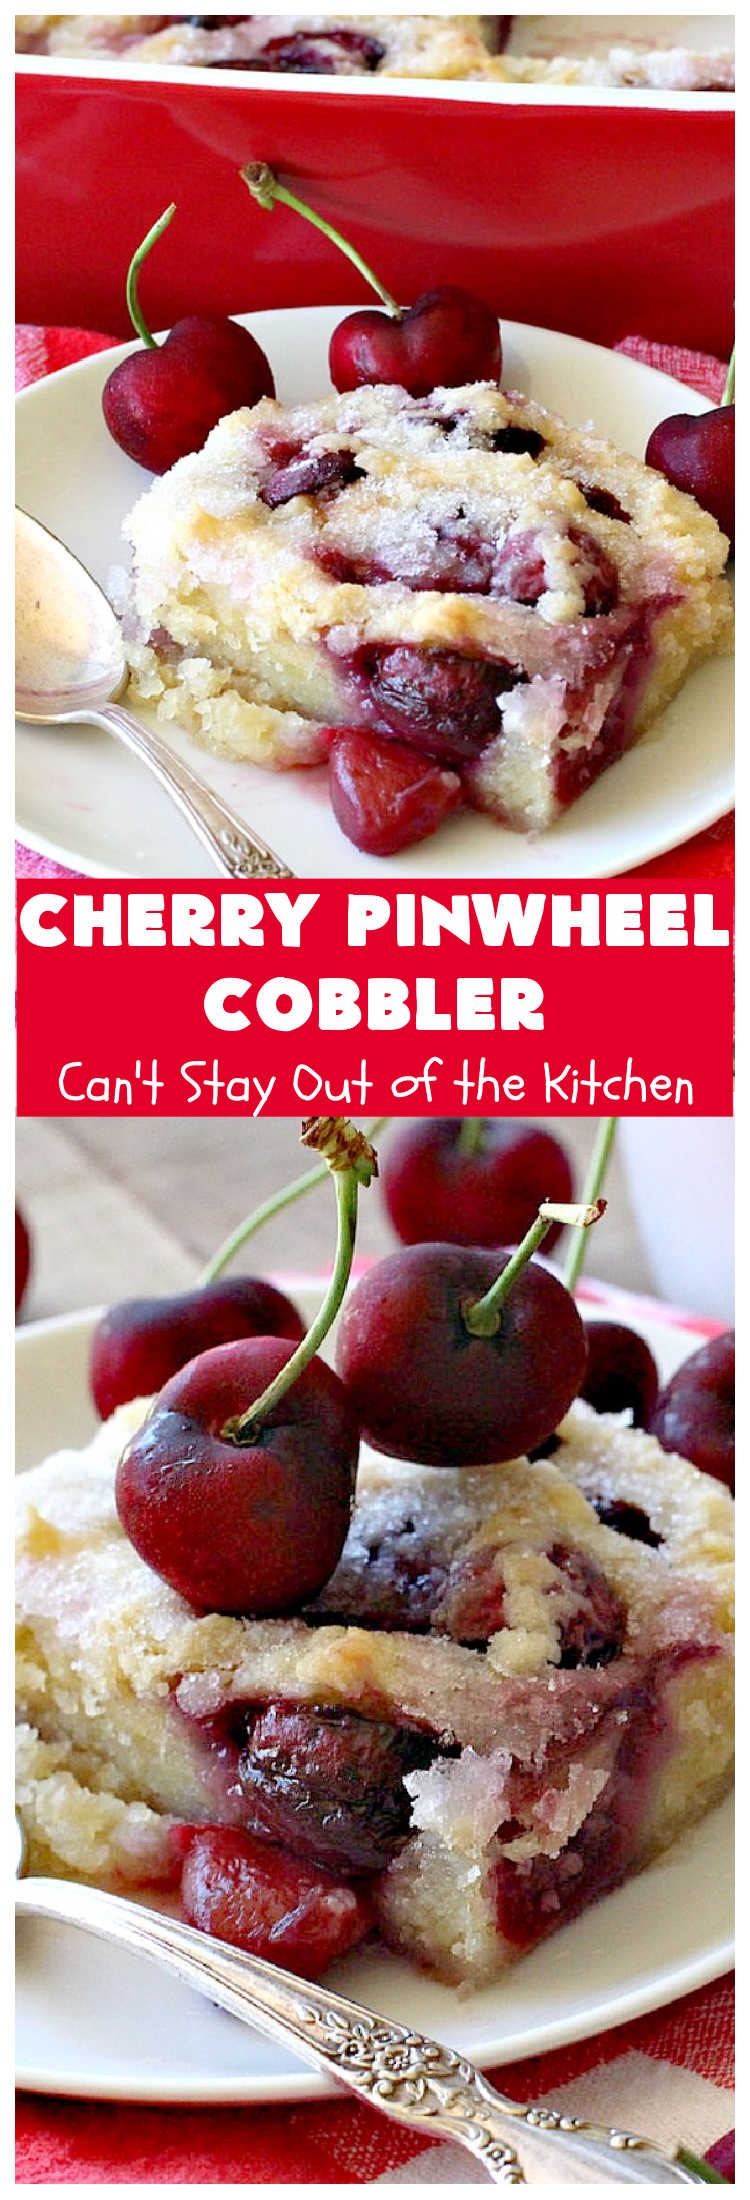 Cherry Pinwheel Cobbler | Can't Stay Out of the Kitchen | this awesome #dessert  rolls up #almond flavored #cherries in #PieCrust. A syrup is poured over top before baking. Terrific #CherryDessert while #FreshCherries are in season. #cobbler #CherryCobbler #CherryPinwheelCobbler #Summer #SummerDessert #NorthwestCherryGrowers #NWCherries #Canbassador 